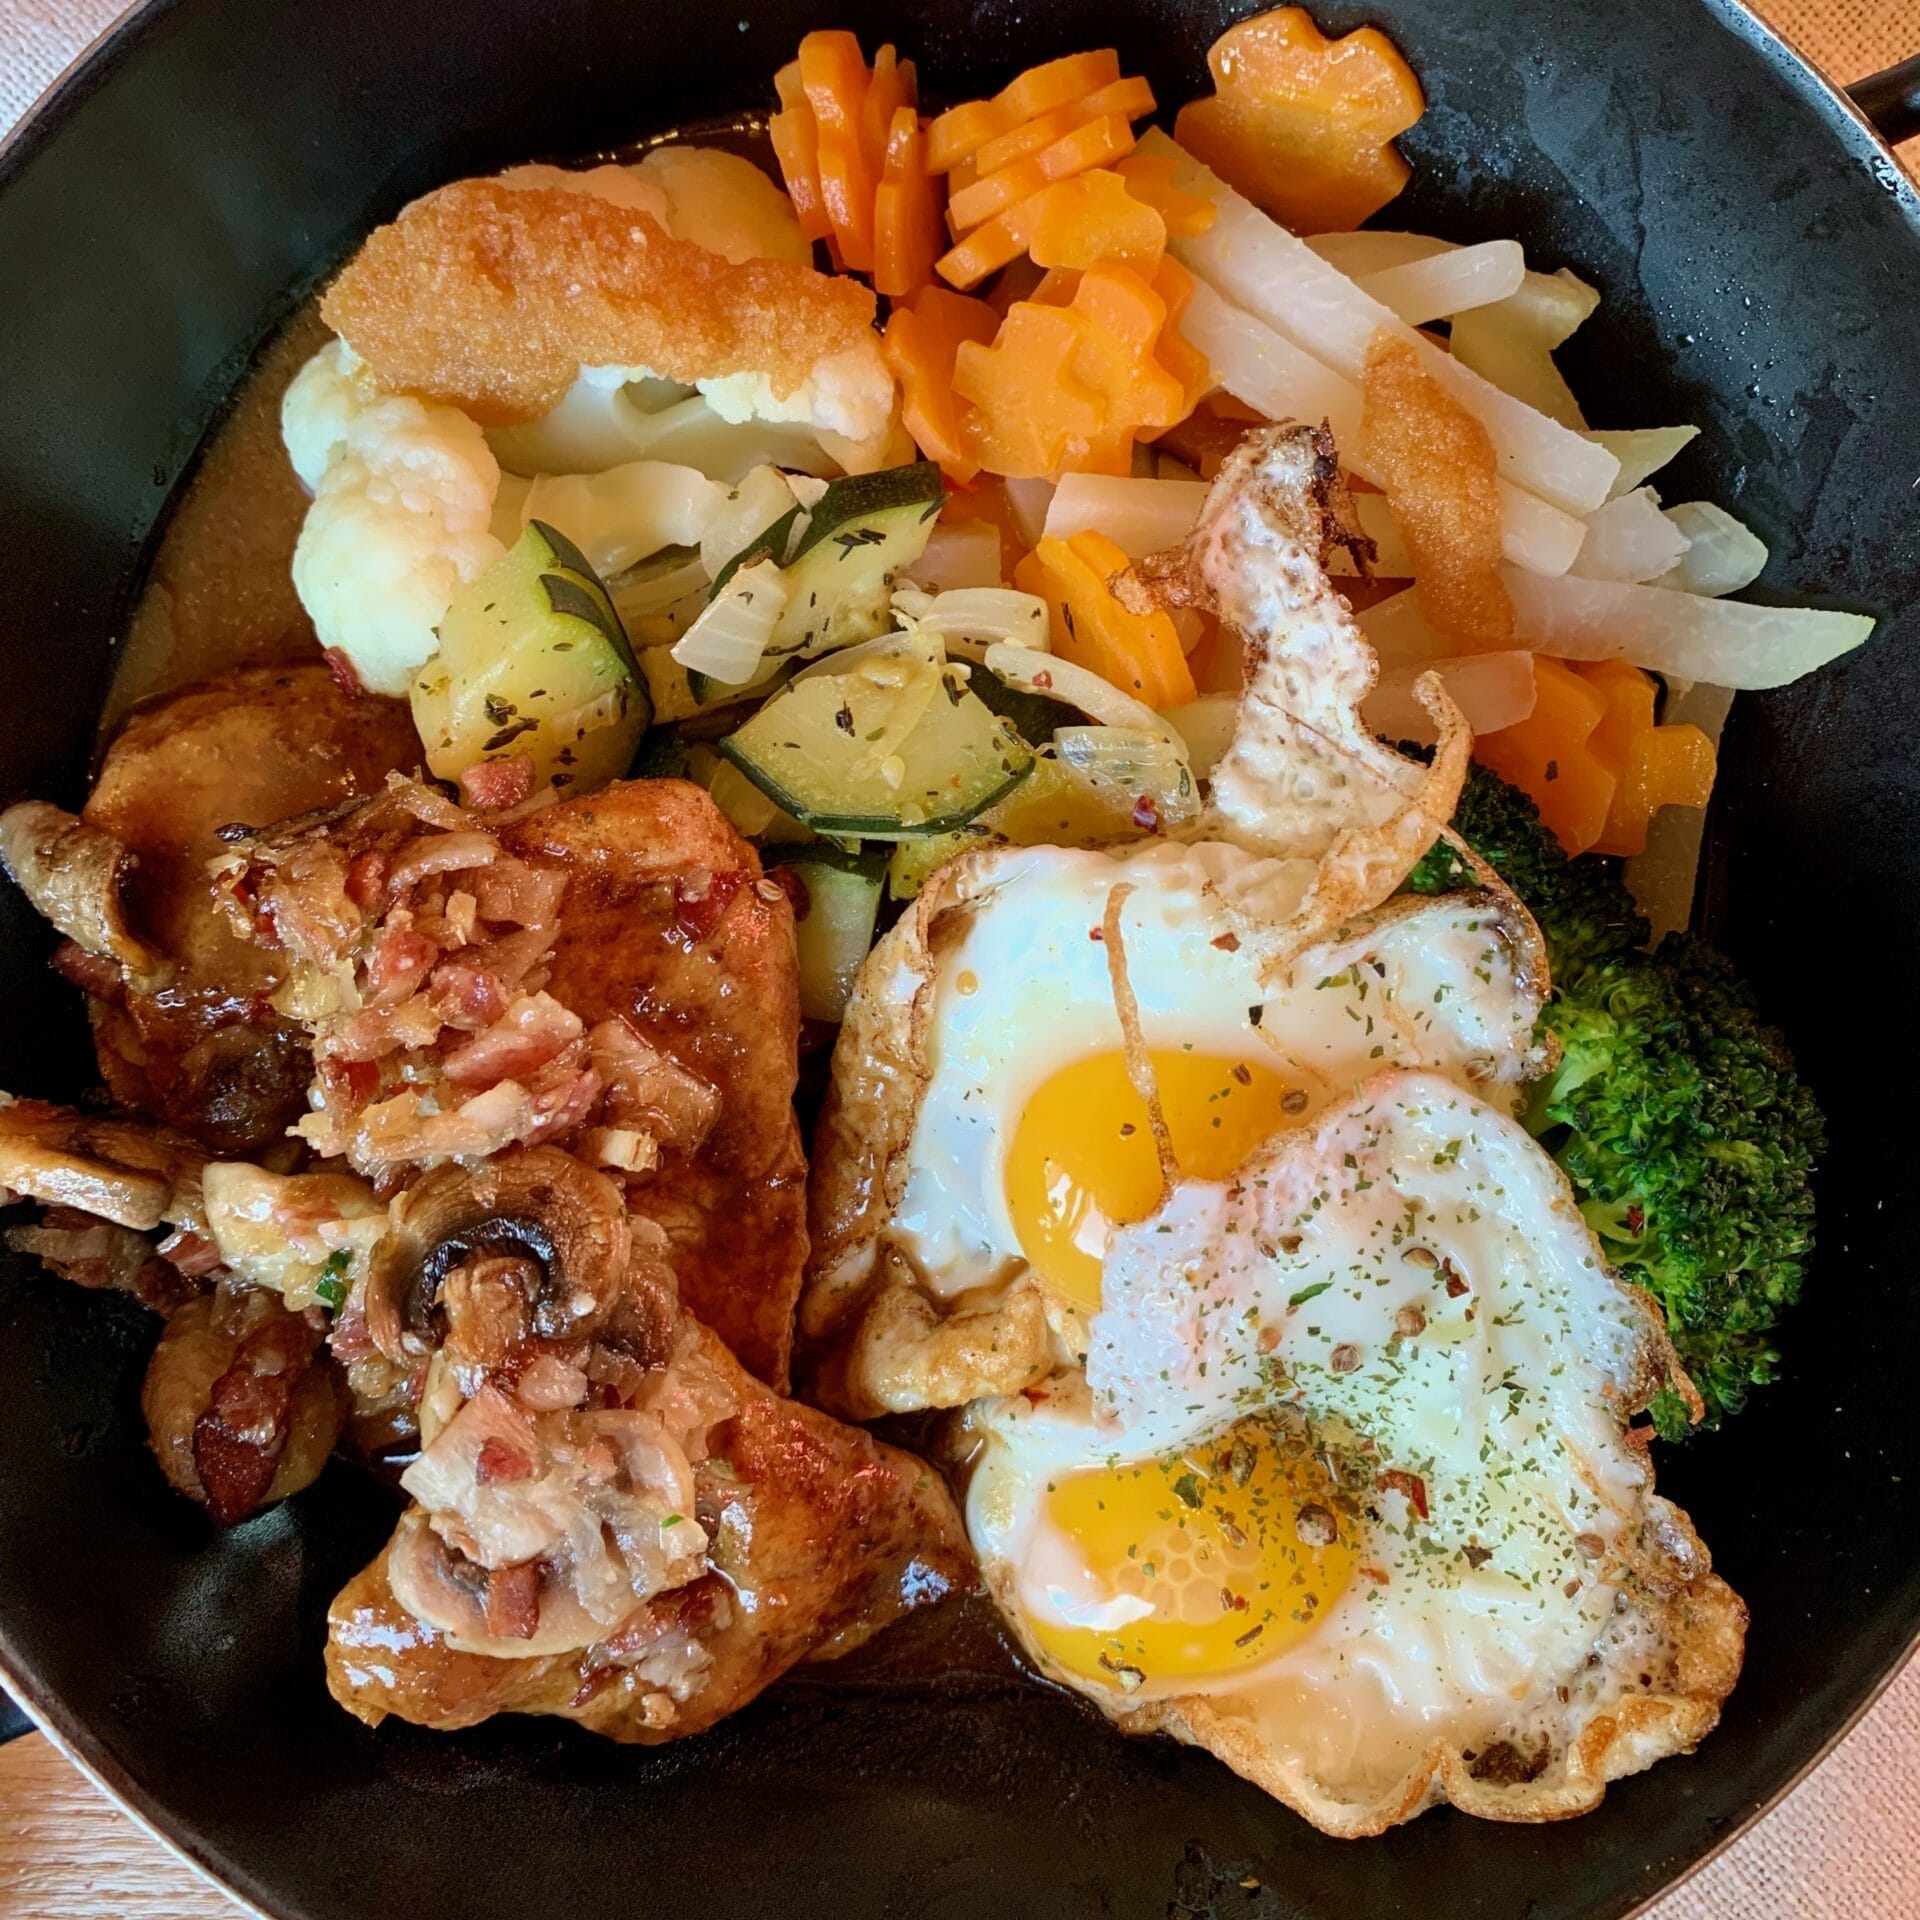 Port with fried eggs, carrots, bacon, broccoli and zucchini